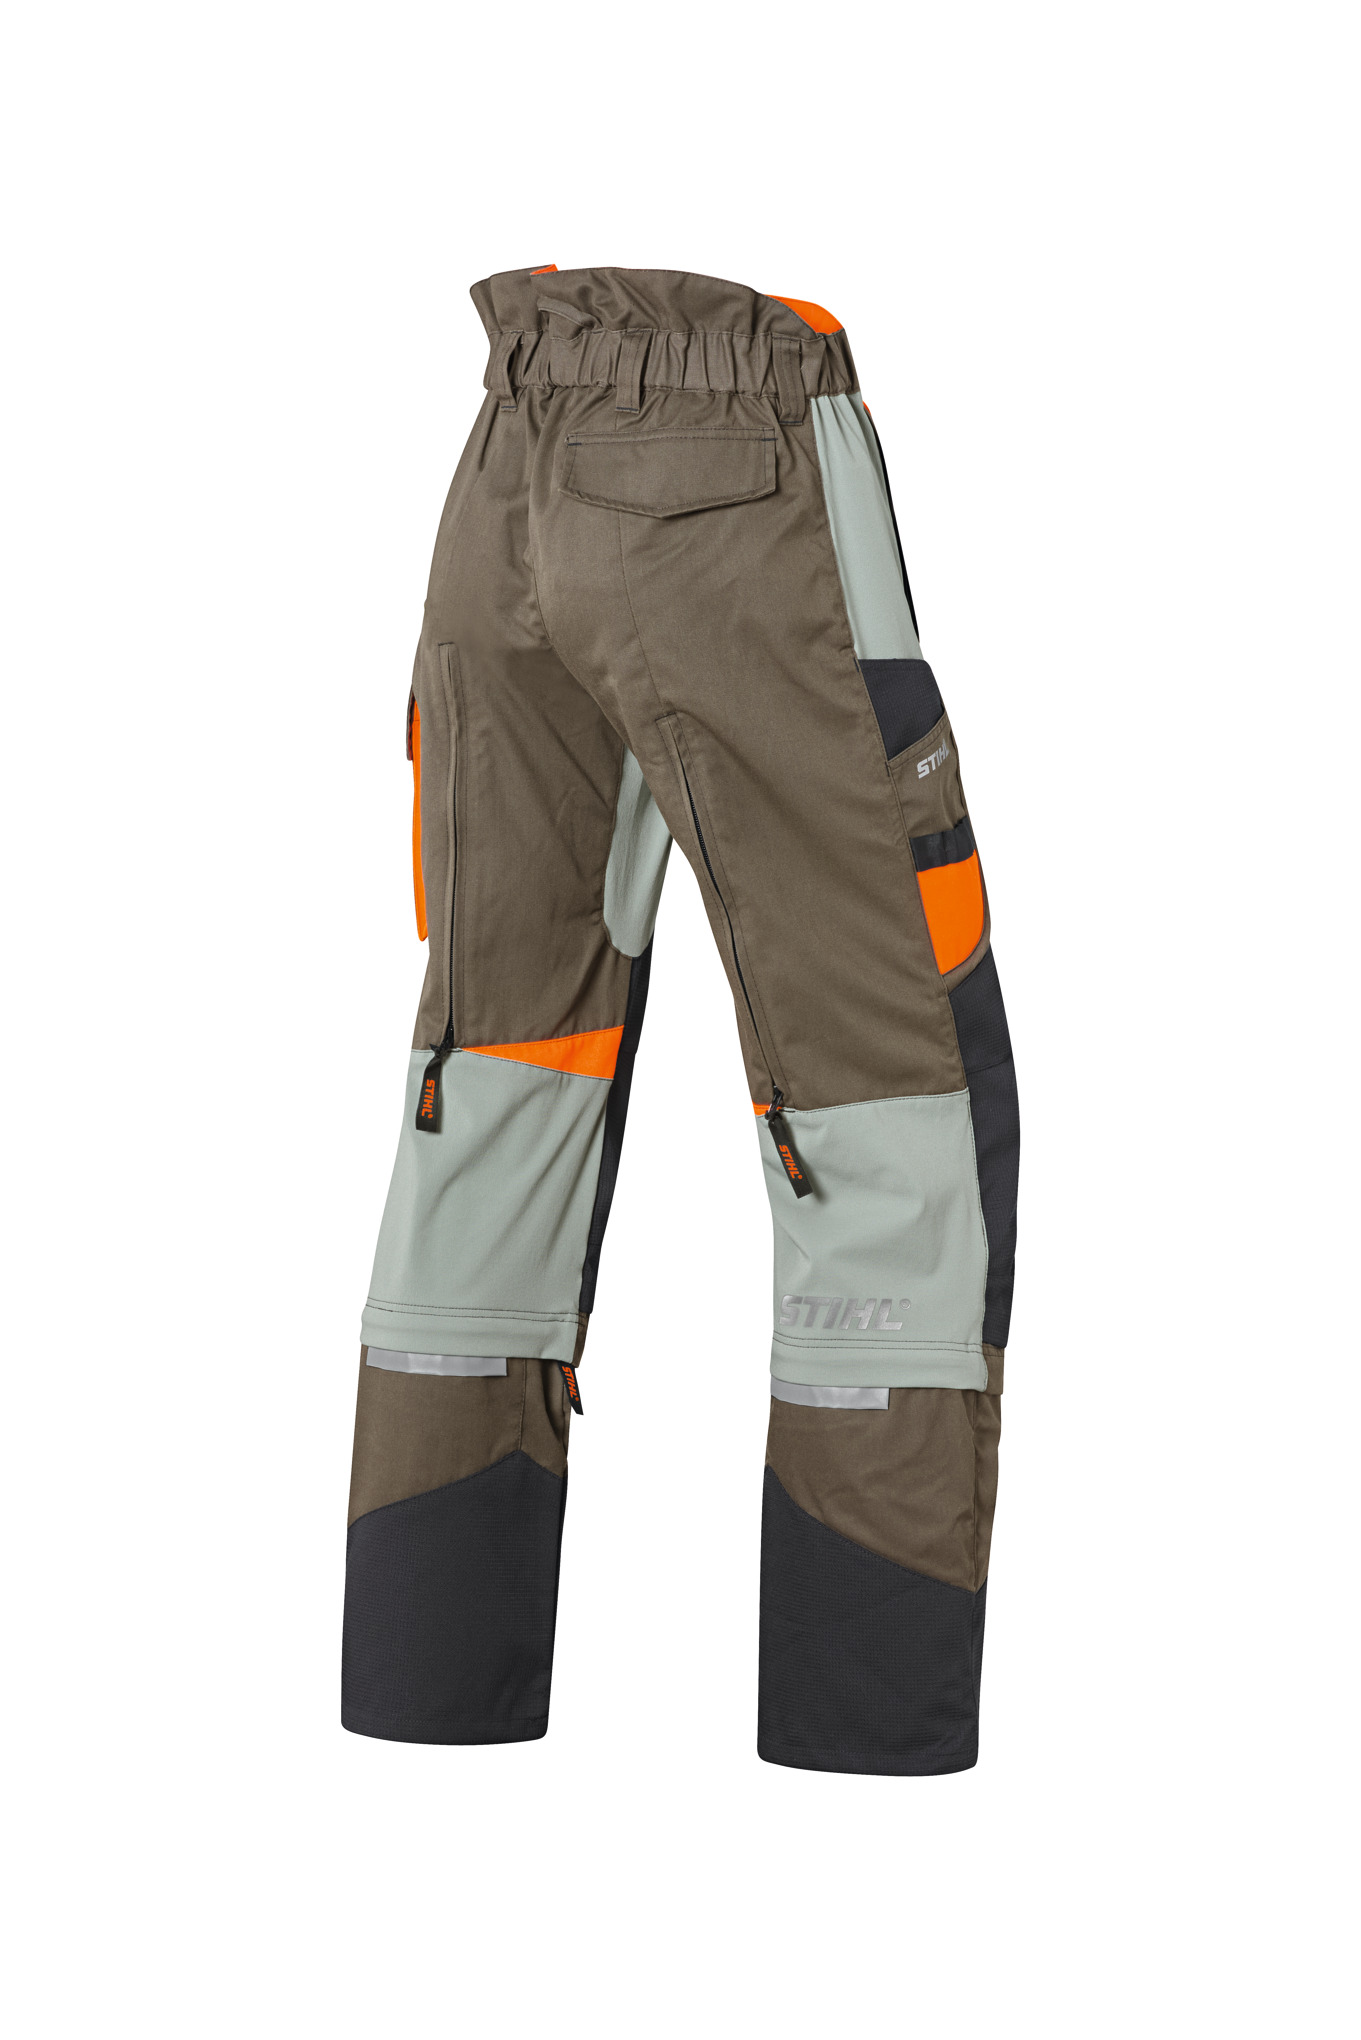 HS MULTIPROTECT protective trousers